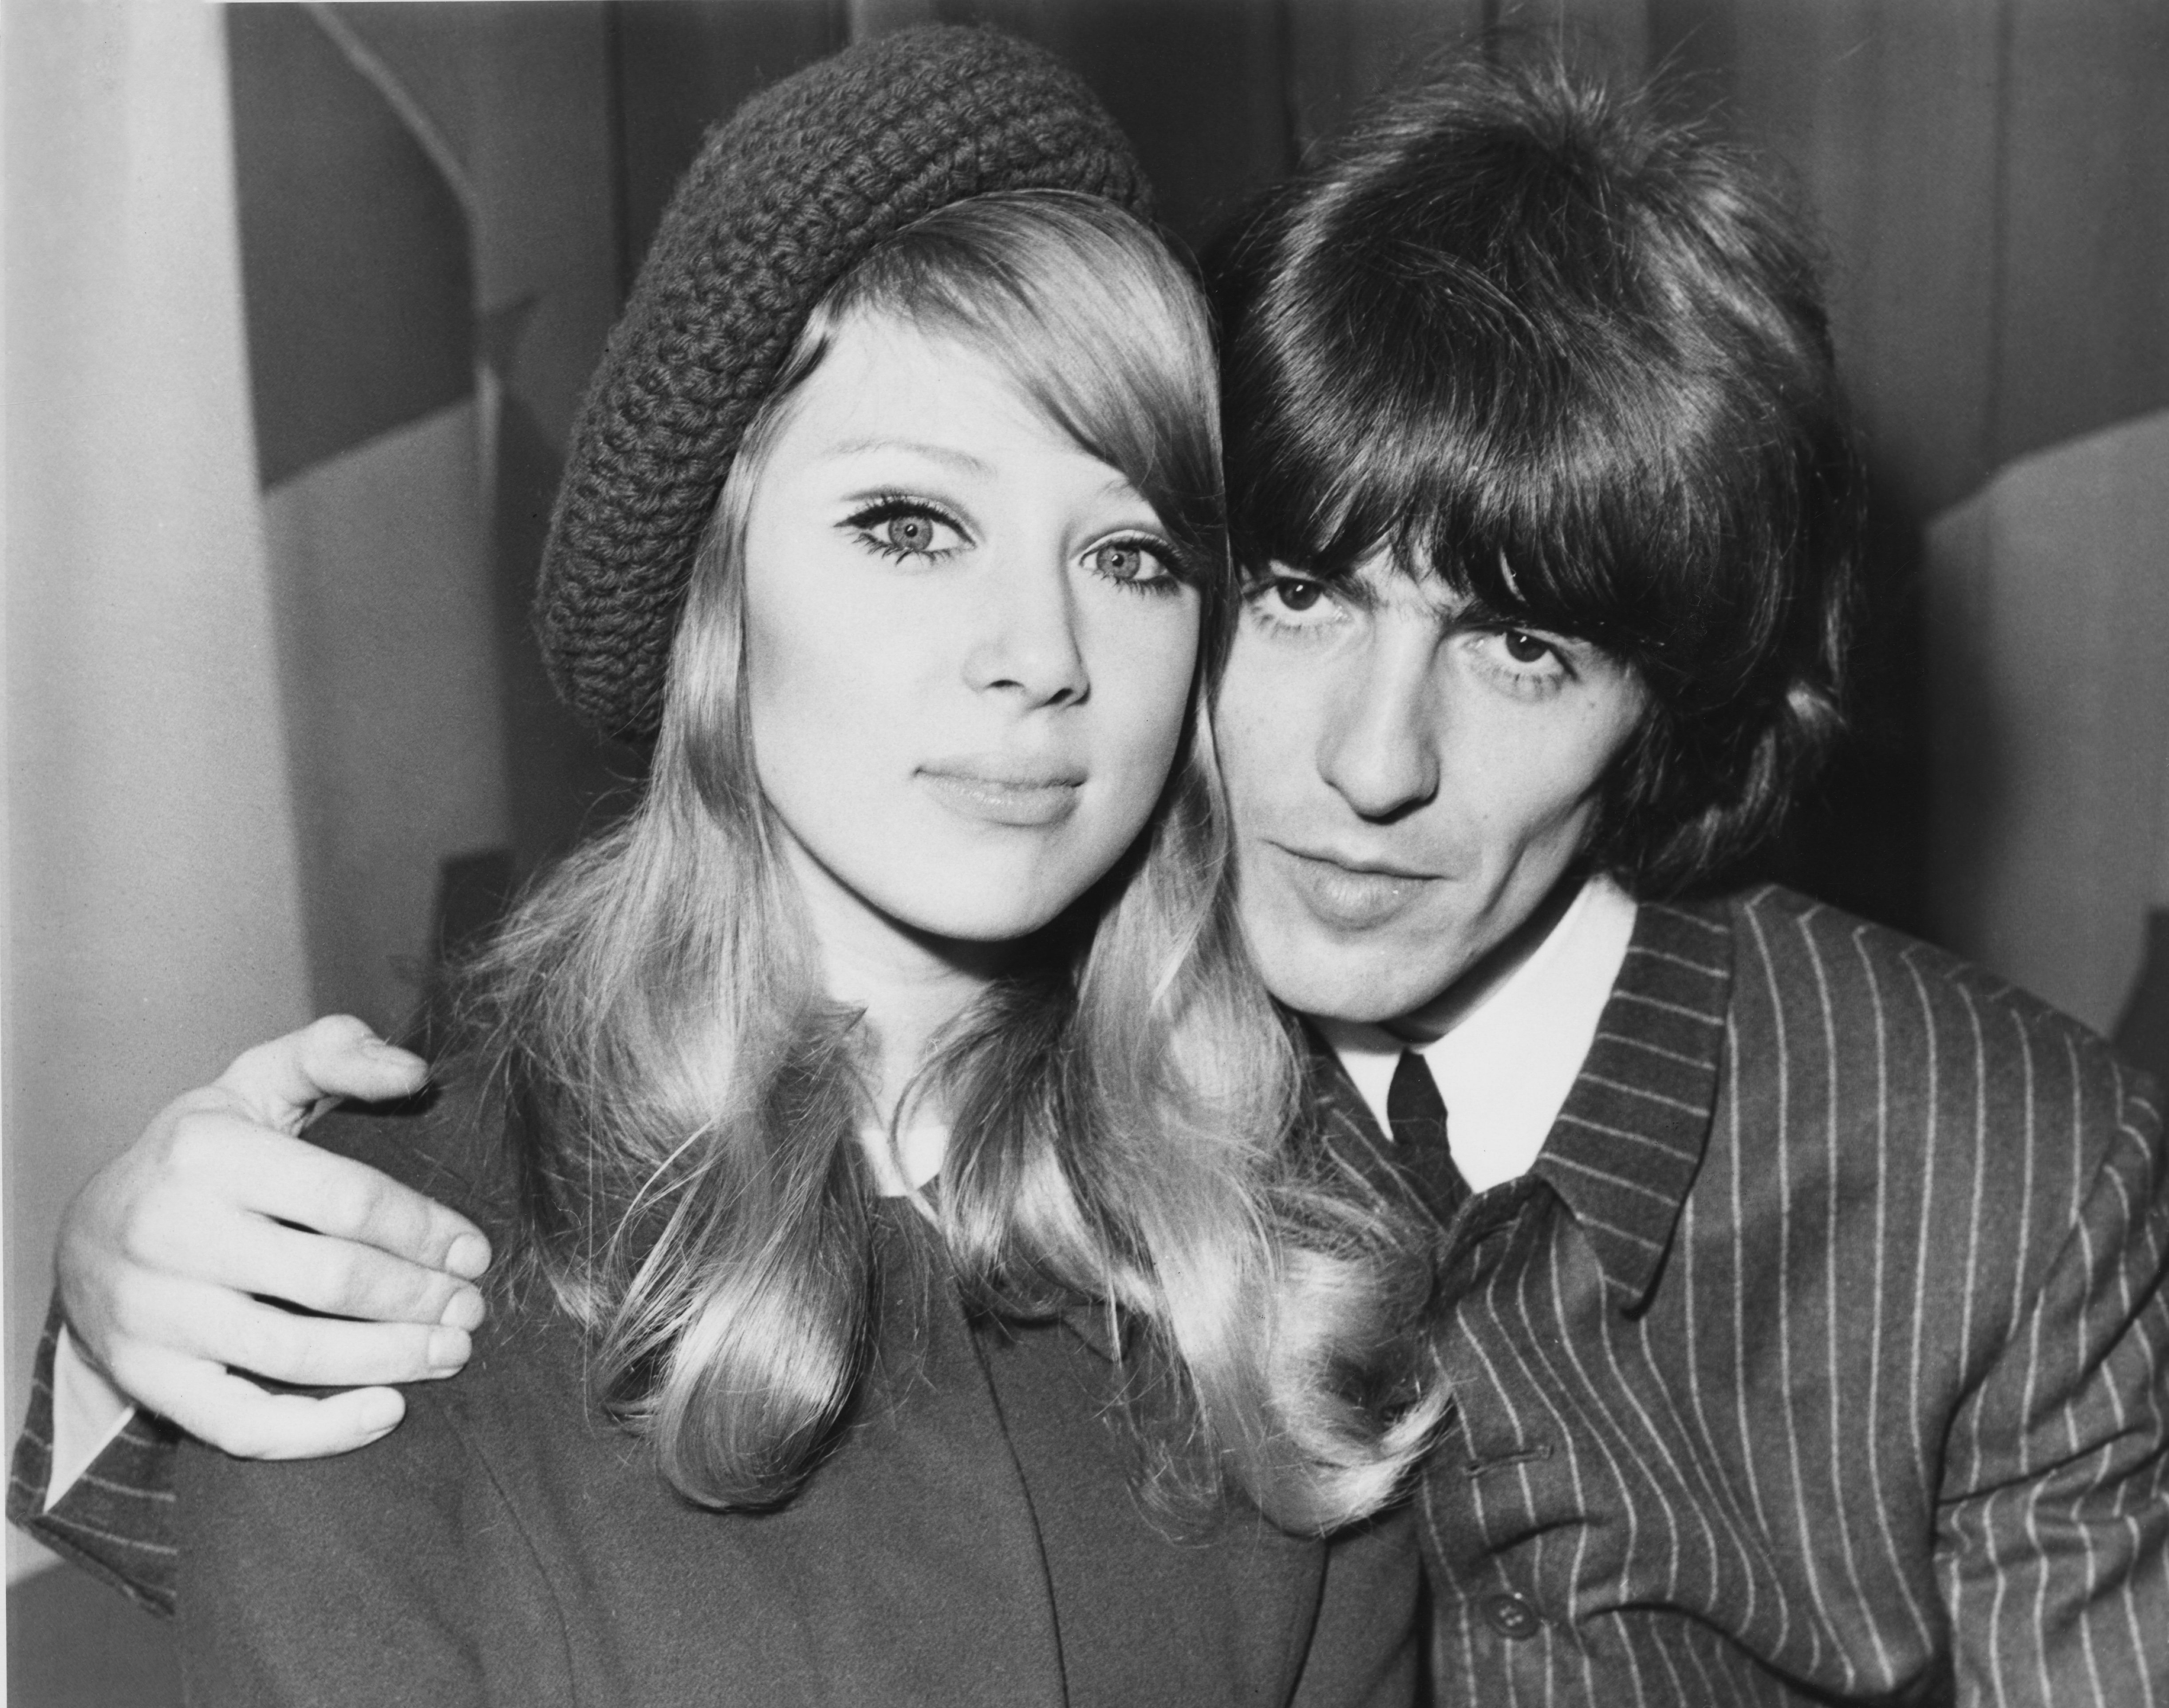 A black and white picture of George Harrison sitting with his arm around Pattie Boyd. She wears a knit hat.